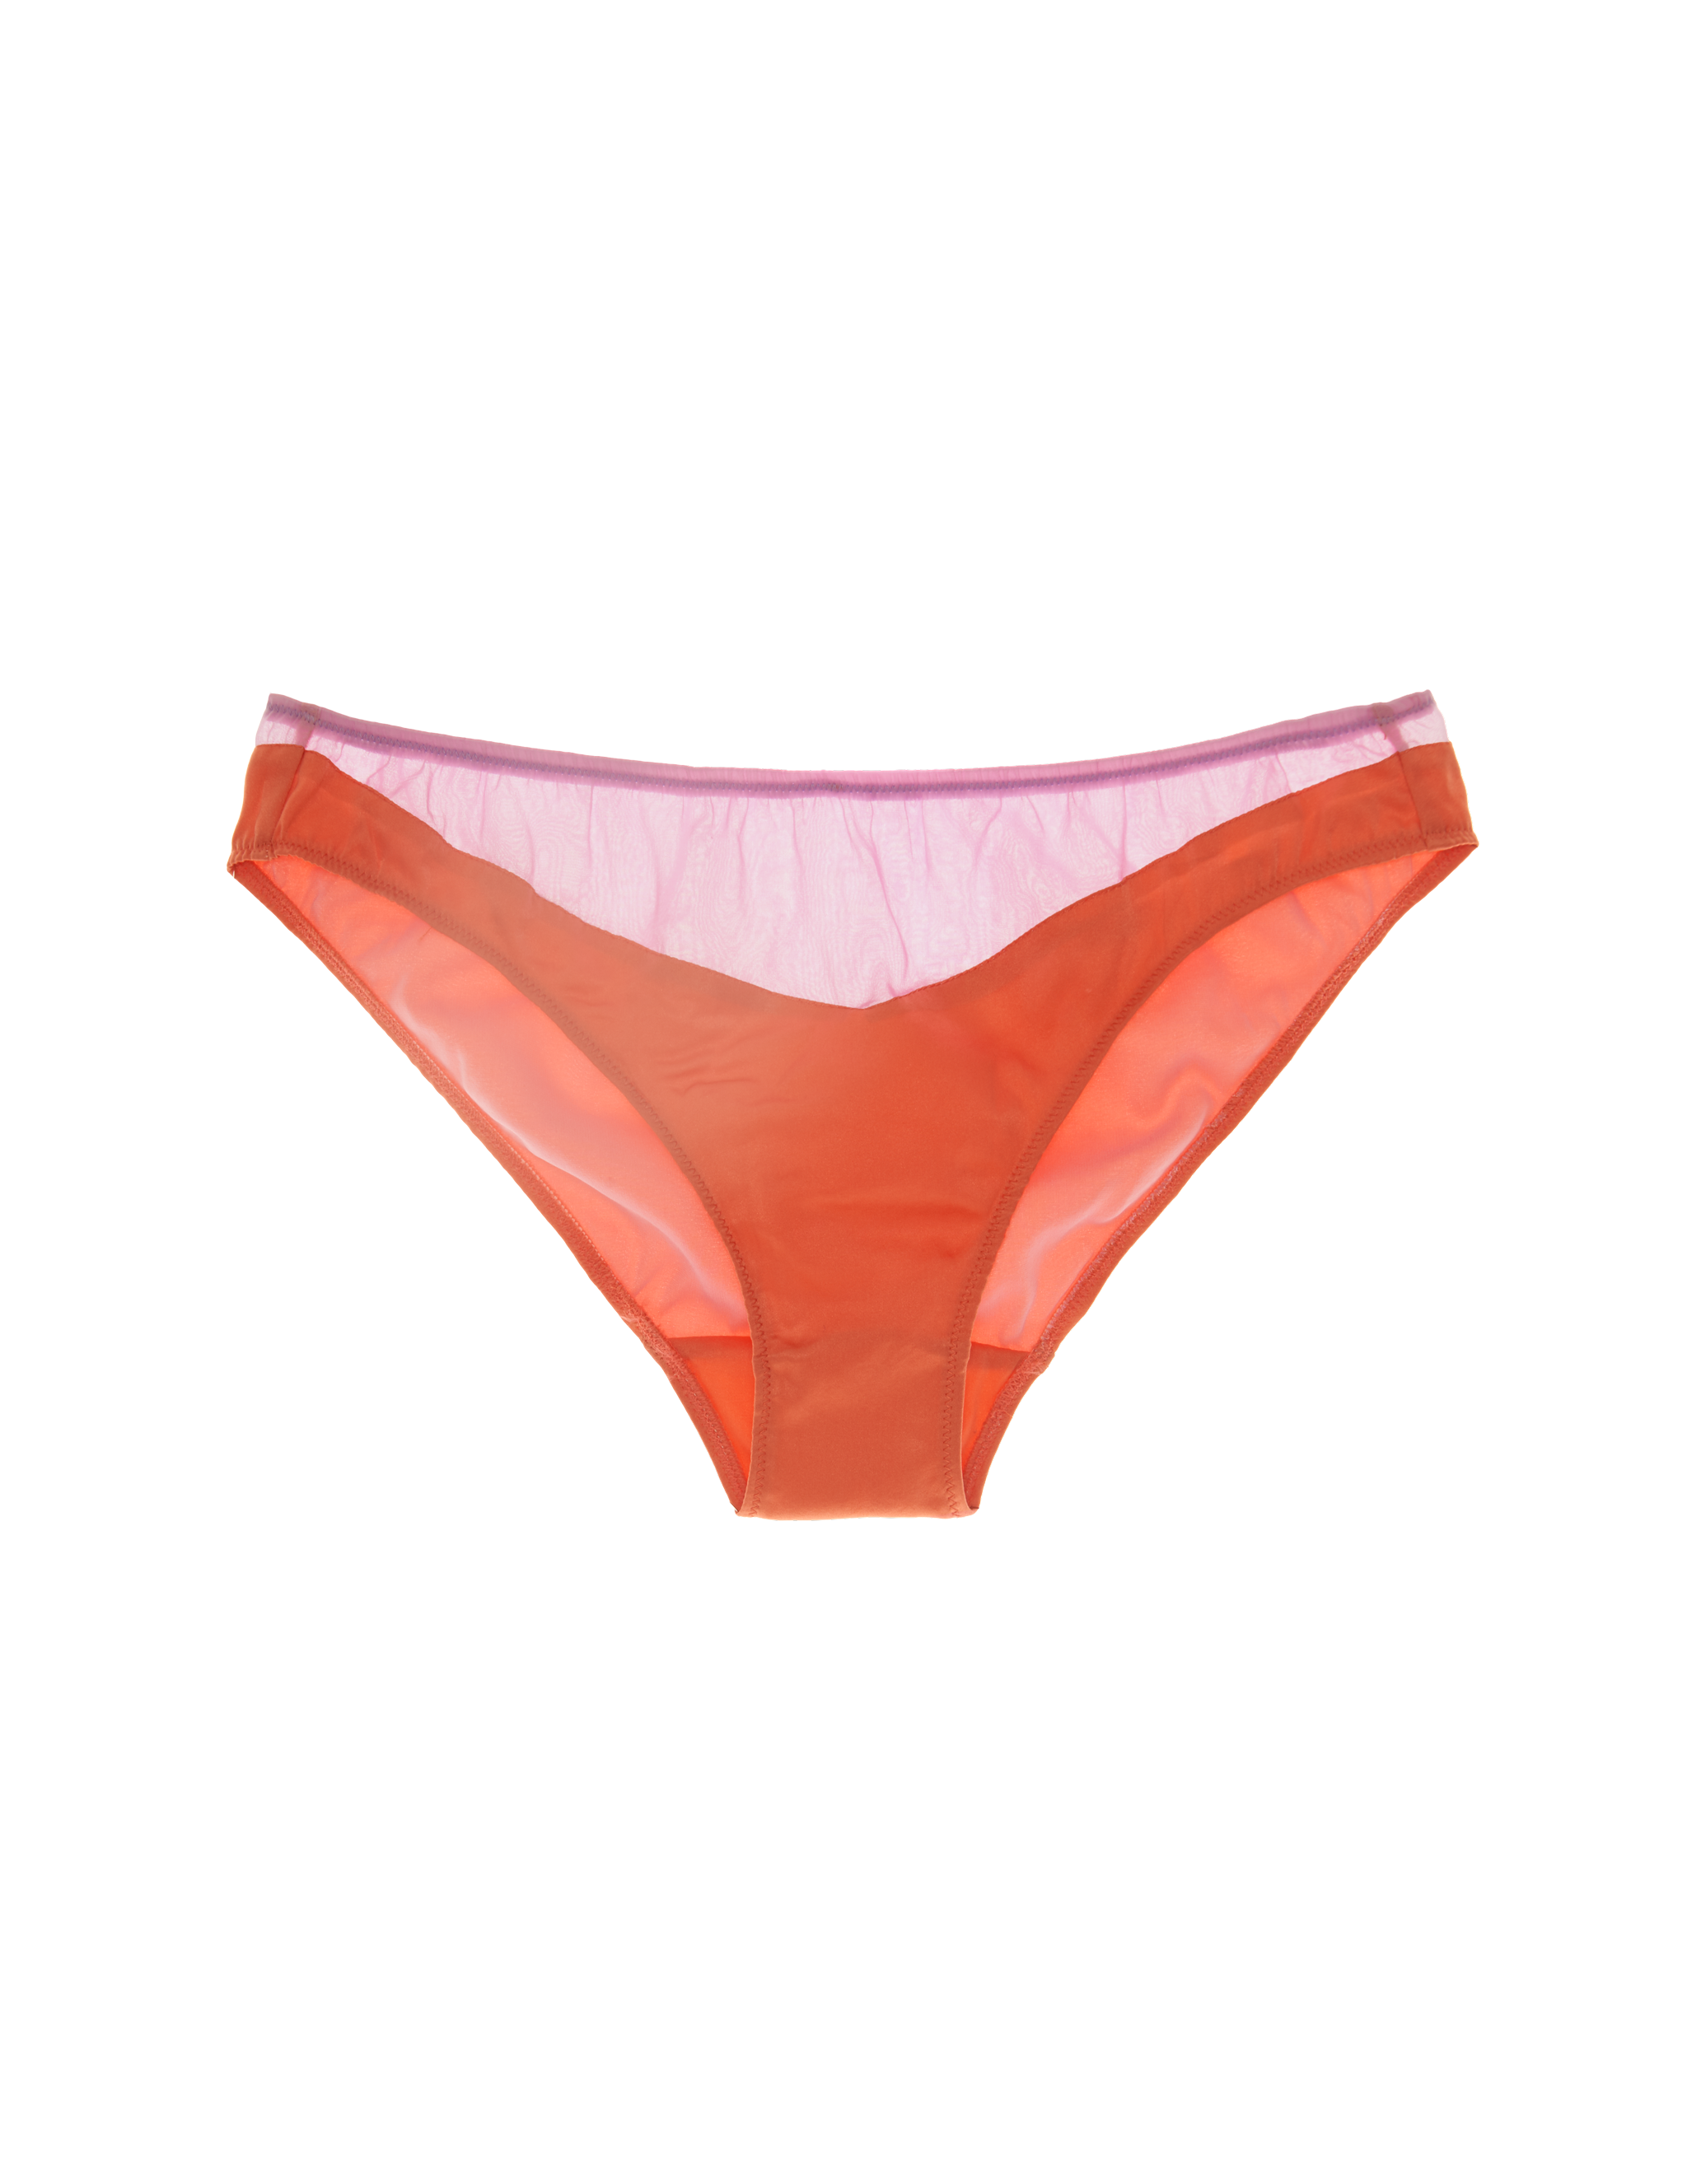 https://cdn.shopify.com/s/files/1/0036/4682/products/pngLCH2003_AARON_PANTY_THISTLE.png?v=1668784877